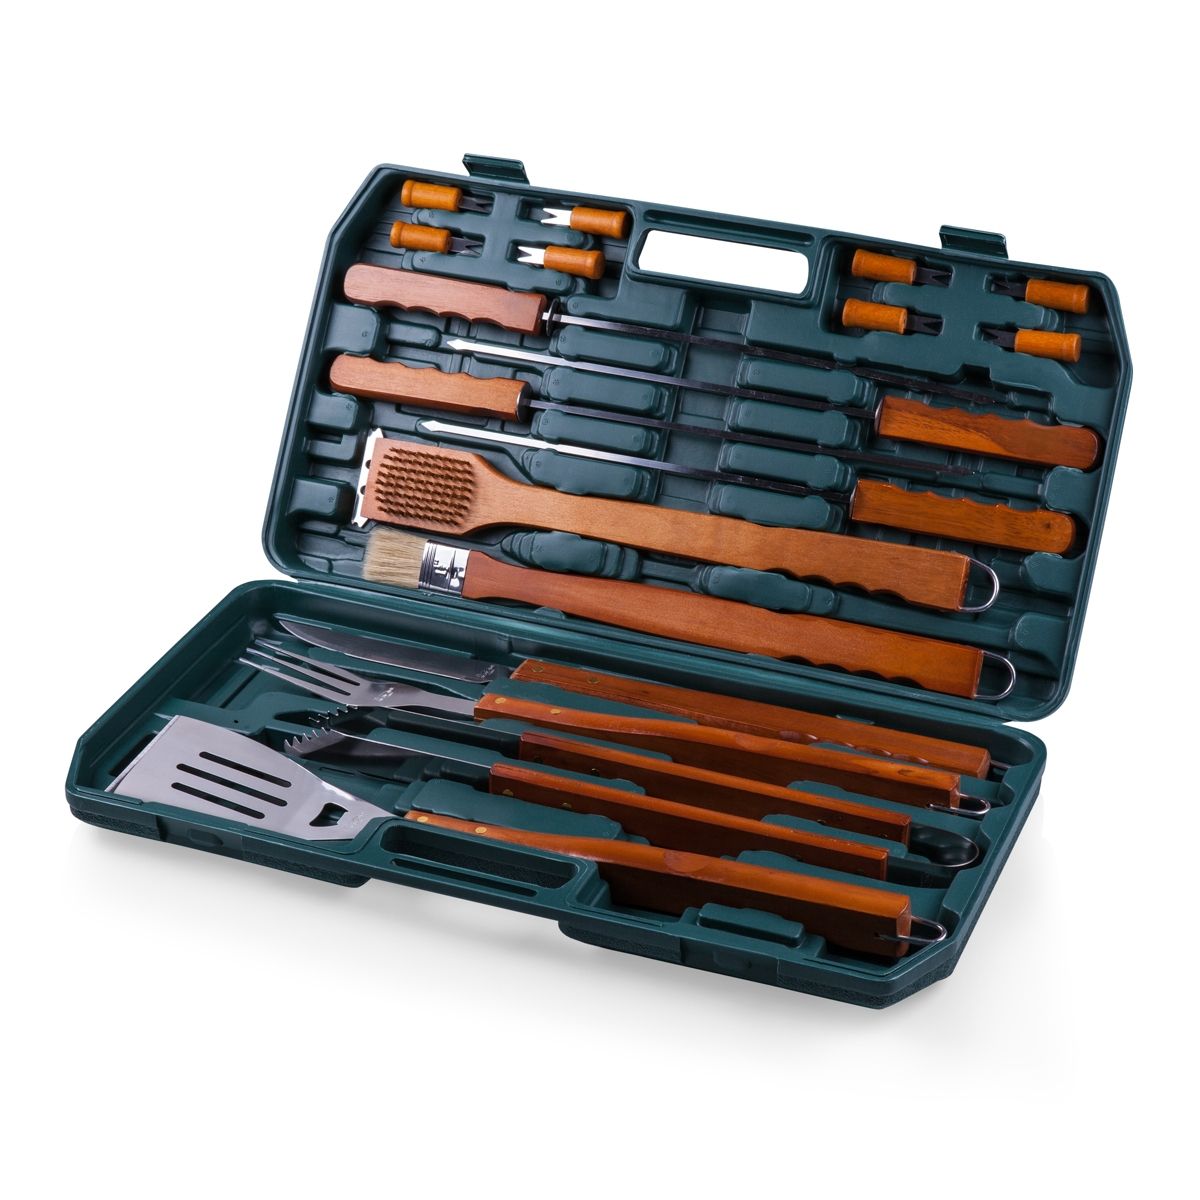 Oniva by Picnic Time 18 Piece Bbq Grill Set | Macys (US)